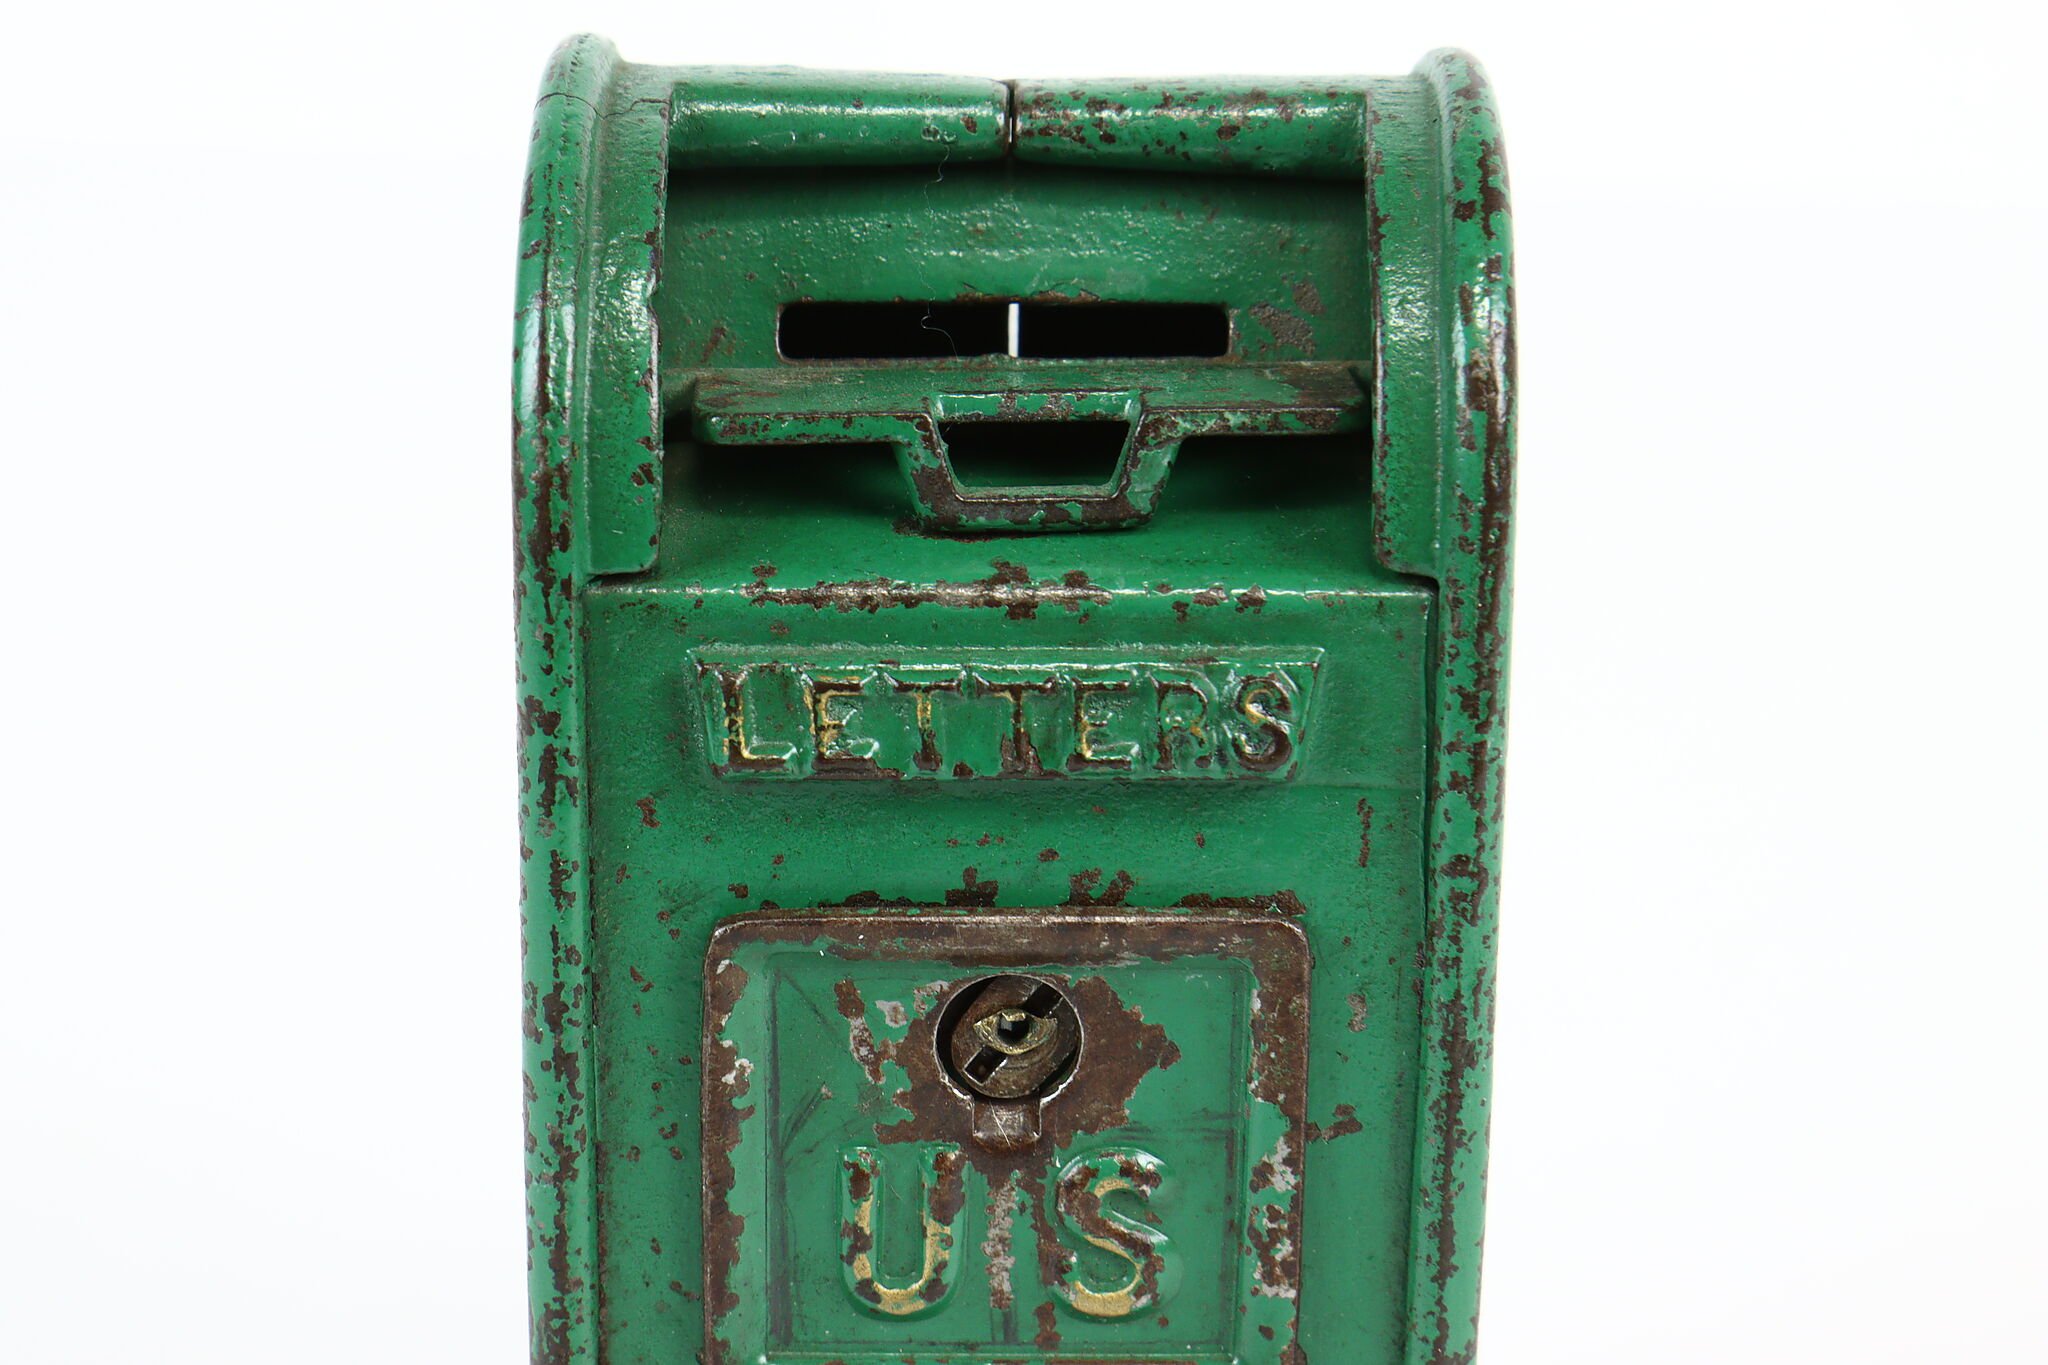 VINTAGE MAILBOX COIN BANK WITH LOCK & KEY NEW IN THE BOX,USA FREE SHIPPING 